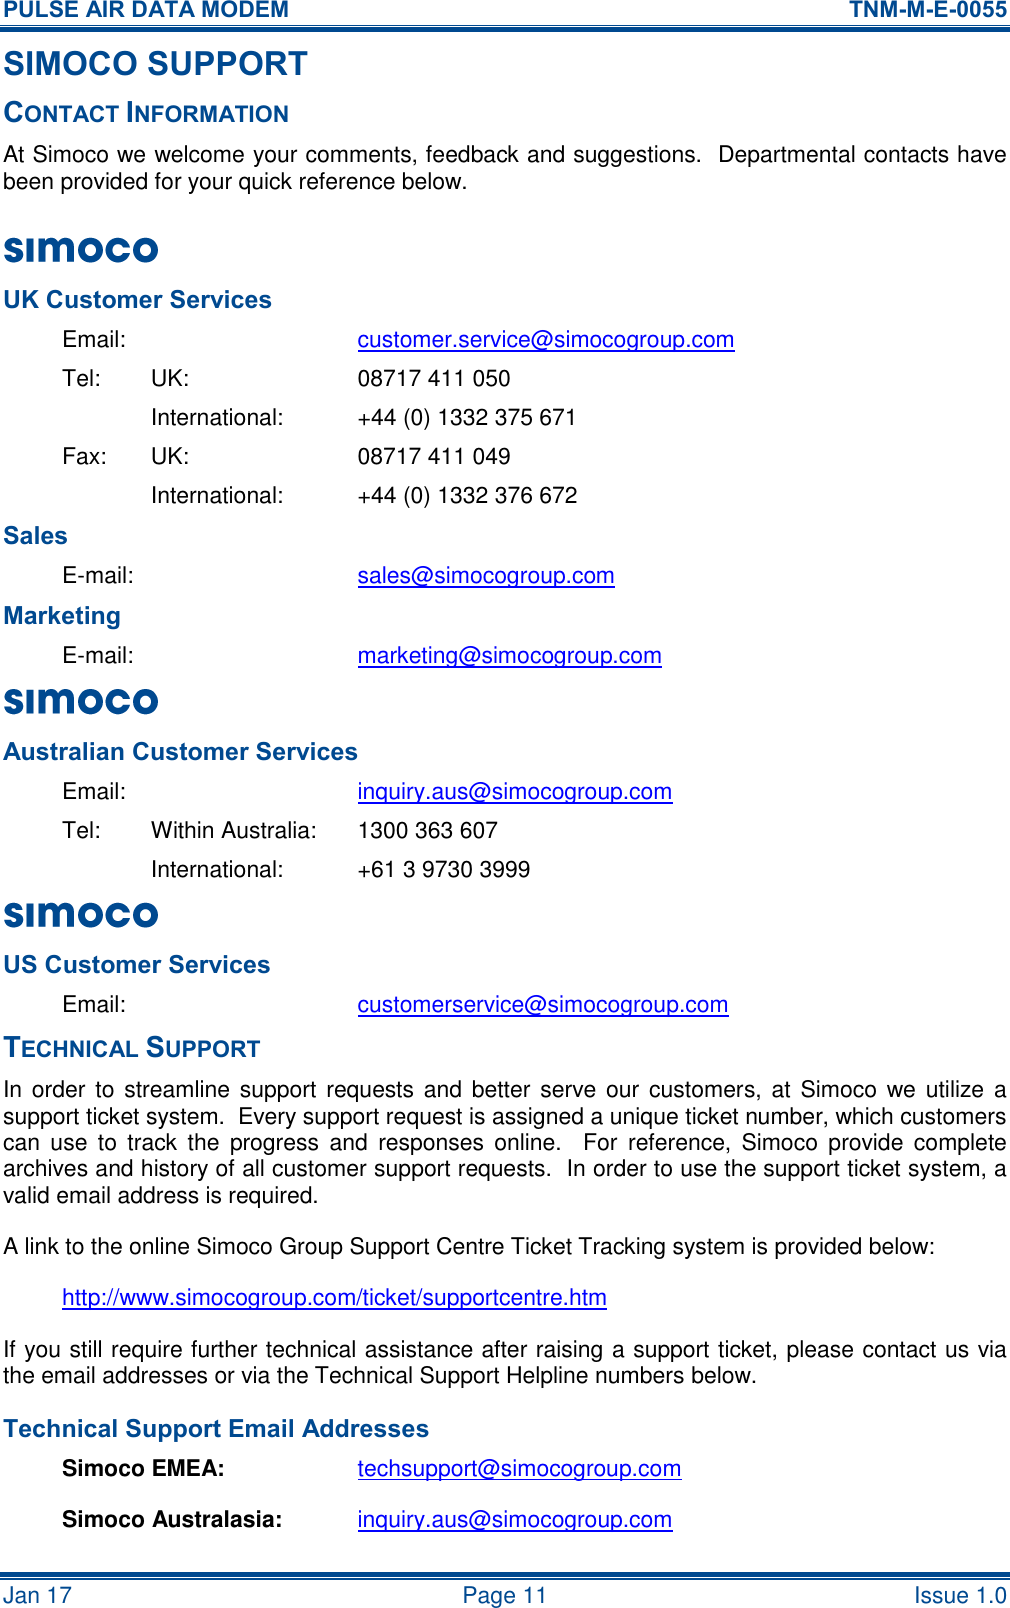 PULSE AIR DATA MODEM  TNM-M-E-0055 Jan 17   Page 11  Issue 1.0 SIMOCO SUPPORT CONTACT INFORMATION At Simoco we welcome your comments, feedback and suggestions.  Departmental contacts have been provided for your quick reference below. UK Customer Services Email:  customer.service@simocogroup.com Tel:  UK:  08717 411 050   International:  +44 (0) 1332 375 671 Fax:  UK:  08717 411 049   International:  +44 (0) 1332 376 672 Sales E-mail:  sales@simocogroup.com Marketing E-mail:  marketing@simocogroup.com  Australian Customer Services Email:    inquiry.aus@simocogroup.com Tel:  Within Australia:  1300 363 607   International:  +61 3 9730 3999 US Customer Services Email:  customerservice@simocogroup.com TECHNICAL SUPPORT In order to  streamline support requests and  better serve our customers, at  Simoco we  utilize a support ticket system.  Every support request is assigned a unique ticket number, which customers can  use  to  track  the  progress  and  responses  online.    For  reference, Simoco  provide  complete archives and history of all customer support requests.  In order to use the support ticket system, a valid email address is required. A link to the online Simoco Group Support Centre Ticket Tracking system is provided below: http://www.simocogroup.com/ticket/supportcentre.htm If you still require further technical assistance after raising a support ticket, please contact us via the email addresses or via the Technical Support Helpline numbers below. Technical Support Email Addresses Simoco EMEA: techsupport@simocogroup.com Simoco Australasia: inquiry.aus@simocogroup.com  